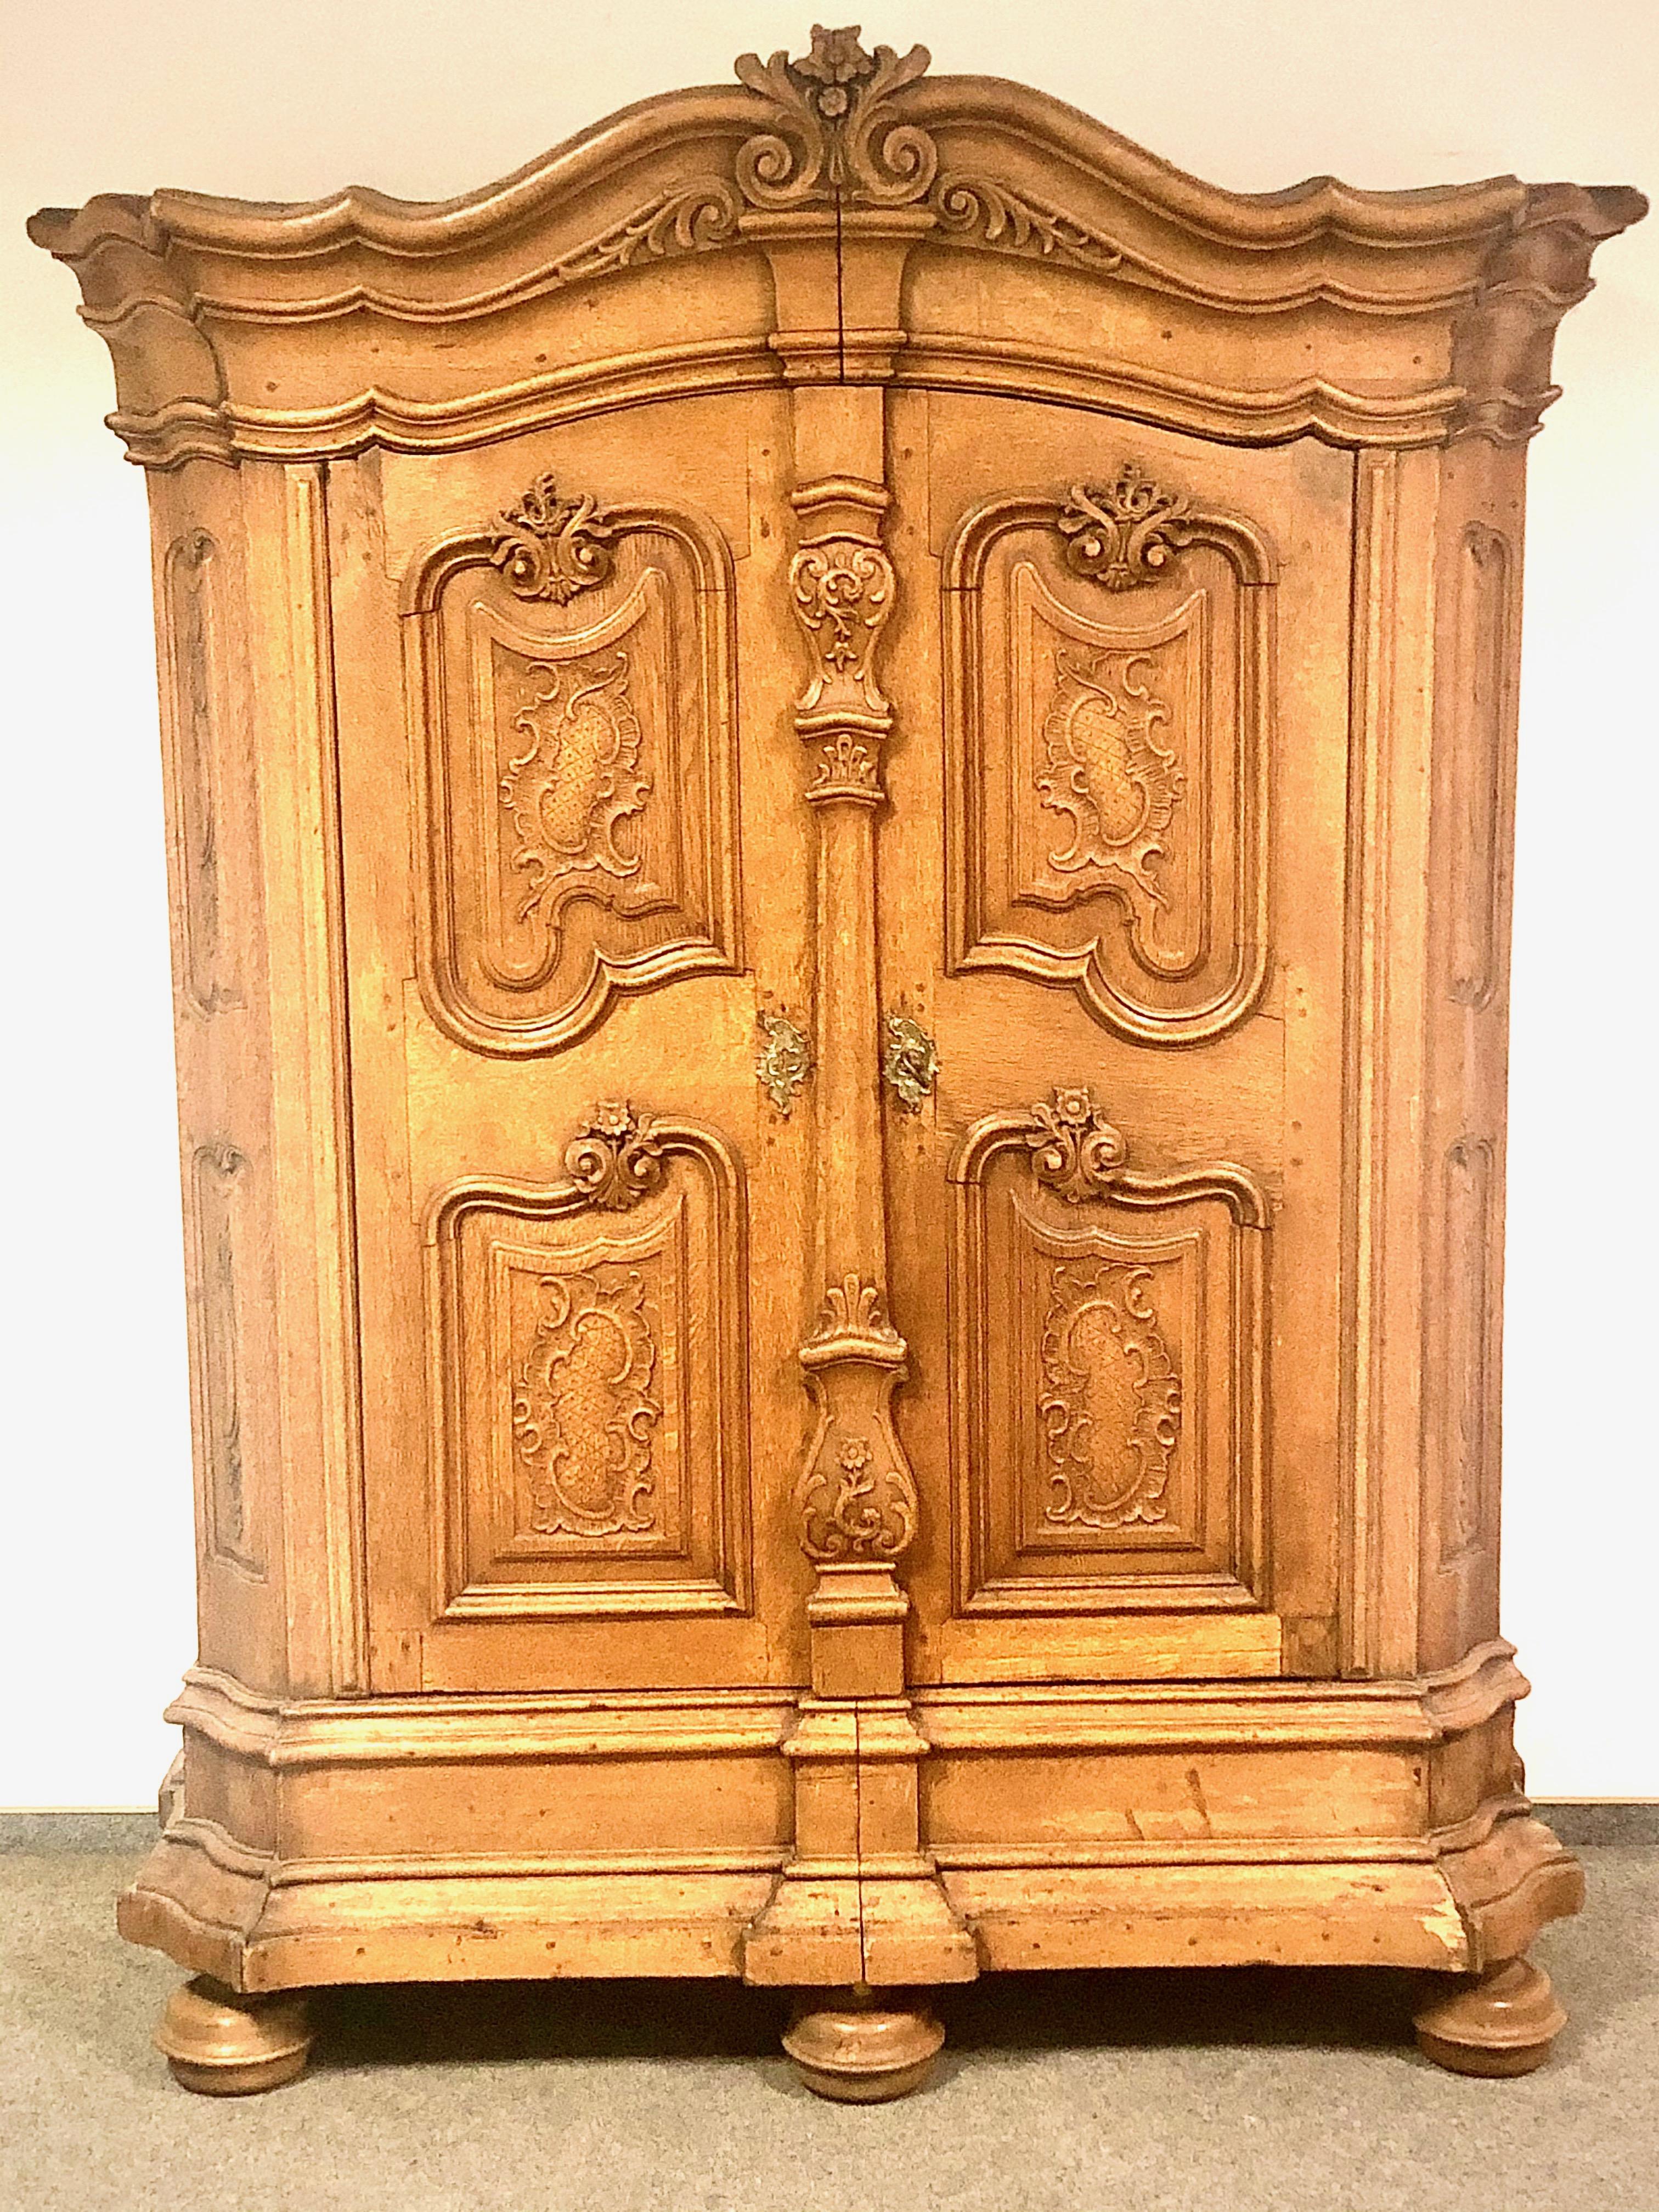 Great baroque cabinet made of fine oak
Rhineland, circa 1730
This baroque oak cabinet is from 1730.
The magnificent carvings and elaborate ornamental and decorative moldings, as well as the transitions from the front of the cabinet to the side